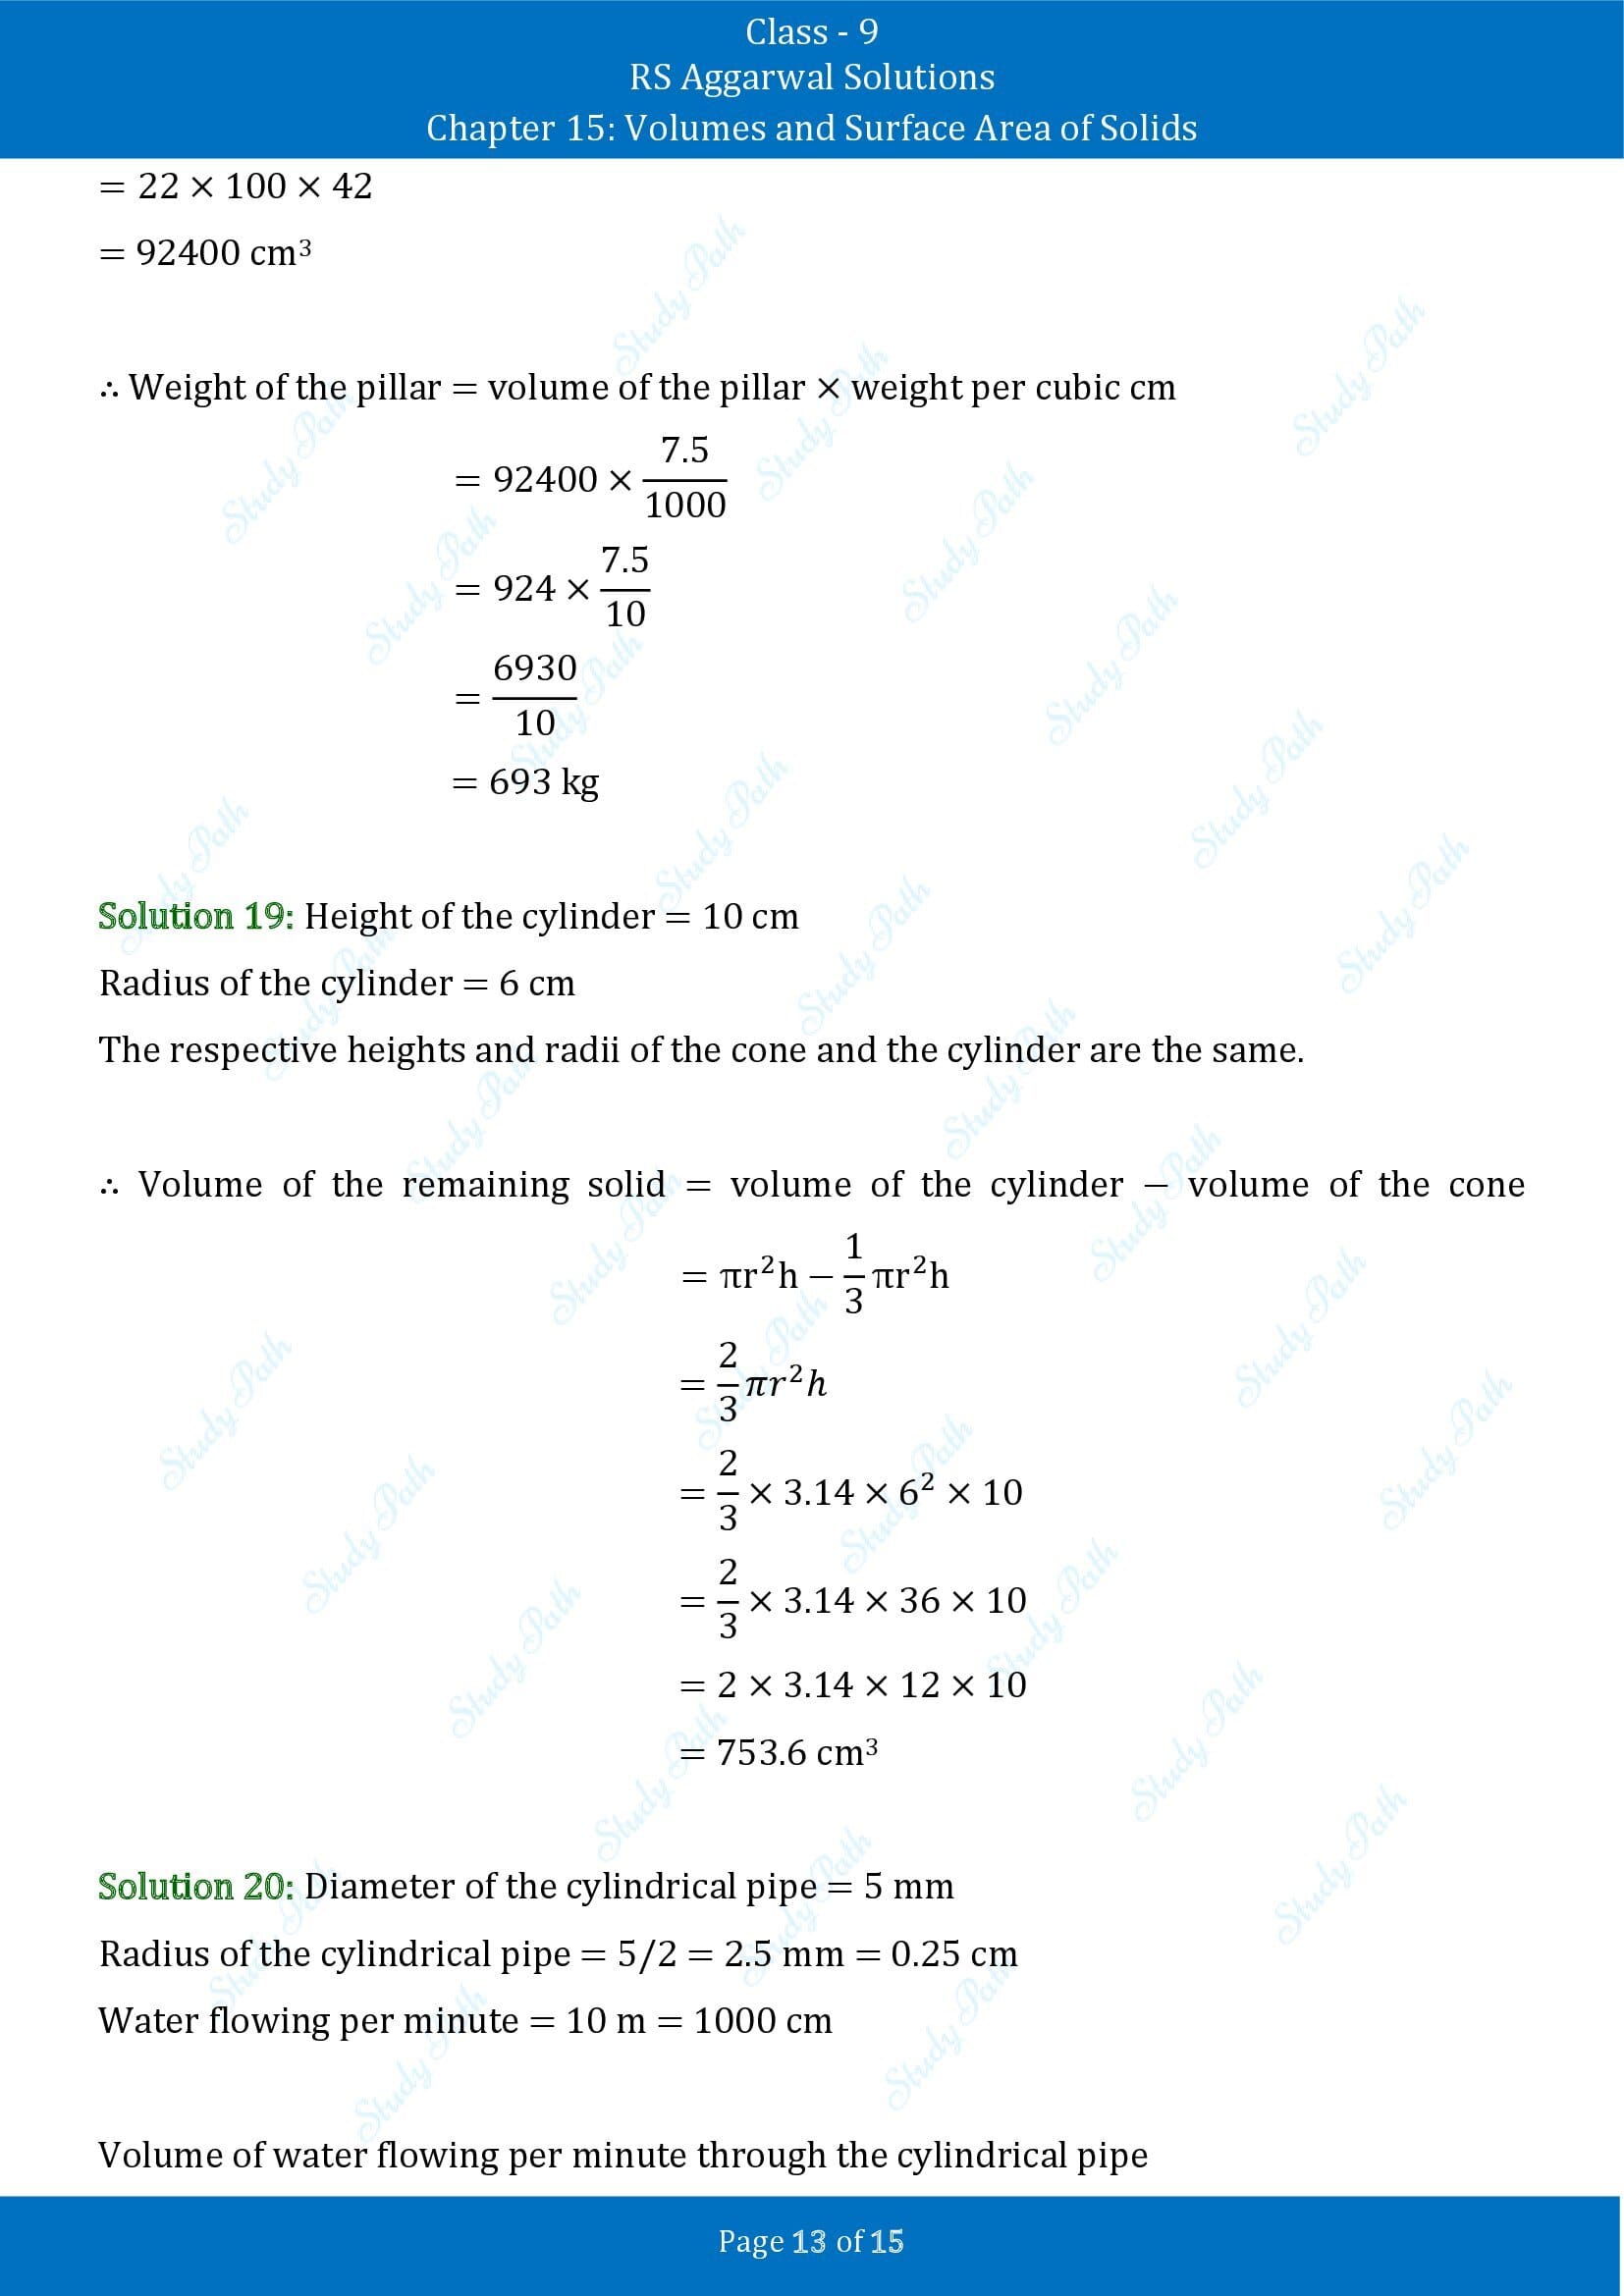 RS Aggarwal Solutions Class 9 Chapter 15 Volumes and Surface Area of Solids Exercise 15C 00013